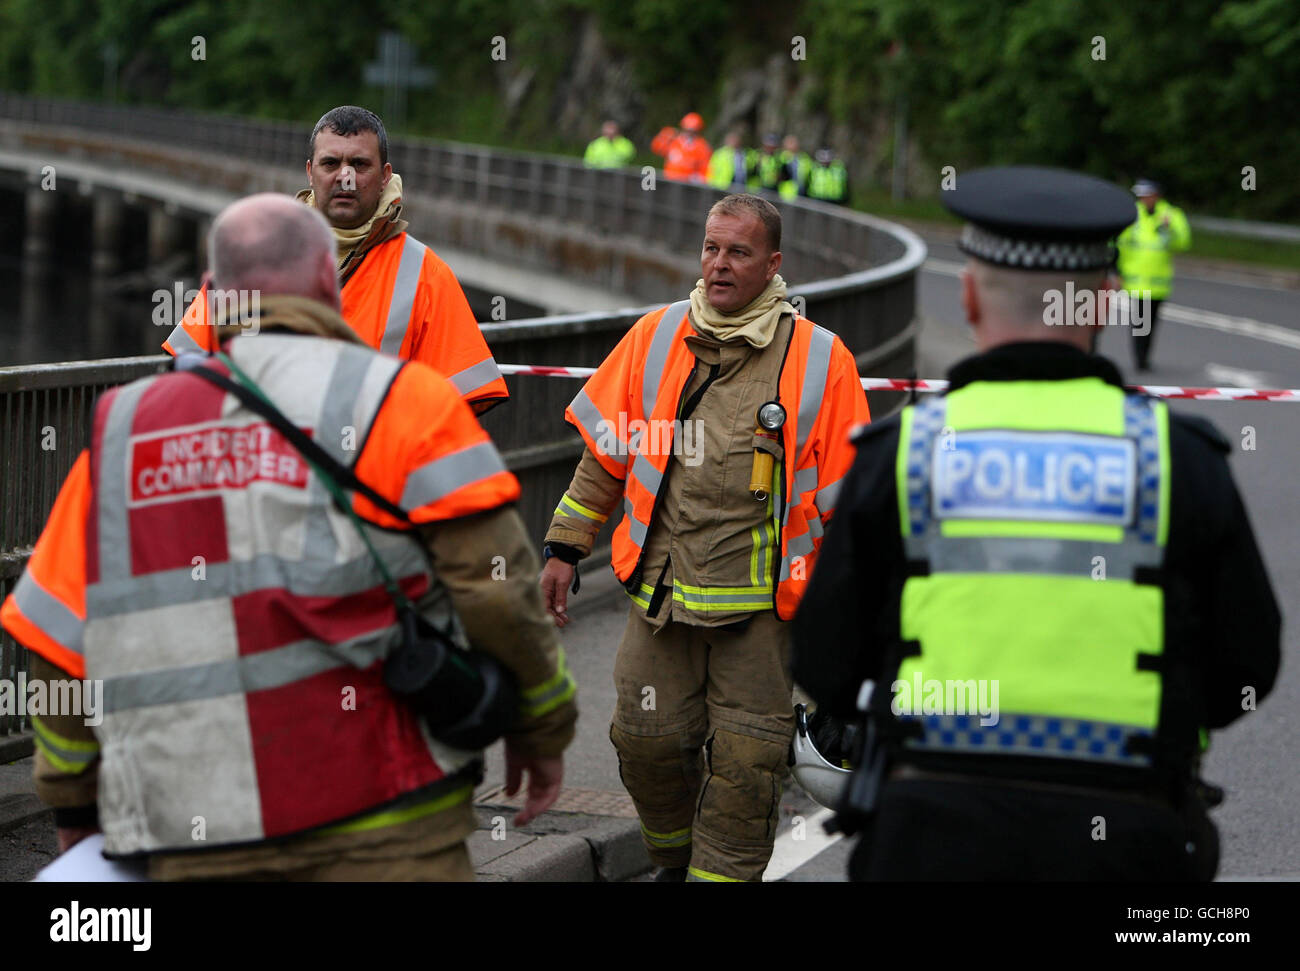 Emergency services close to the scene of a train derailment near the Falls of Cruachan power station, by Loch Awe in Argyll. Eight people were taken to hospital after 6.20pm service from Glasgow to Oban derailed and caught fire. Stock Photo